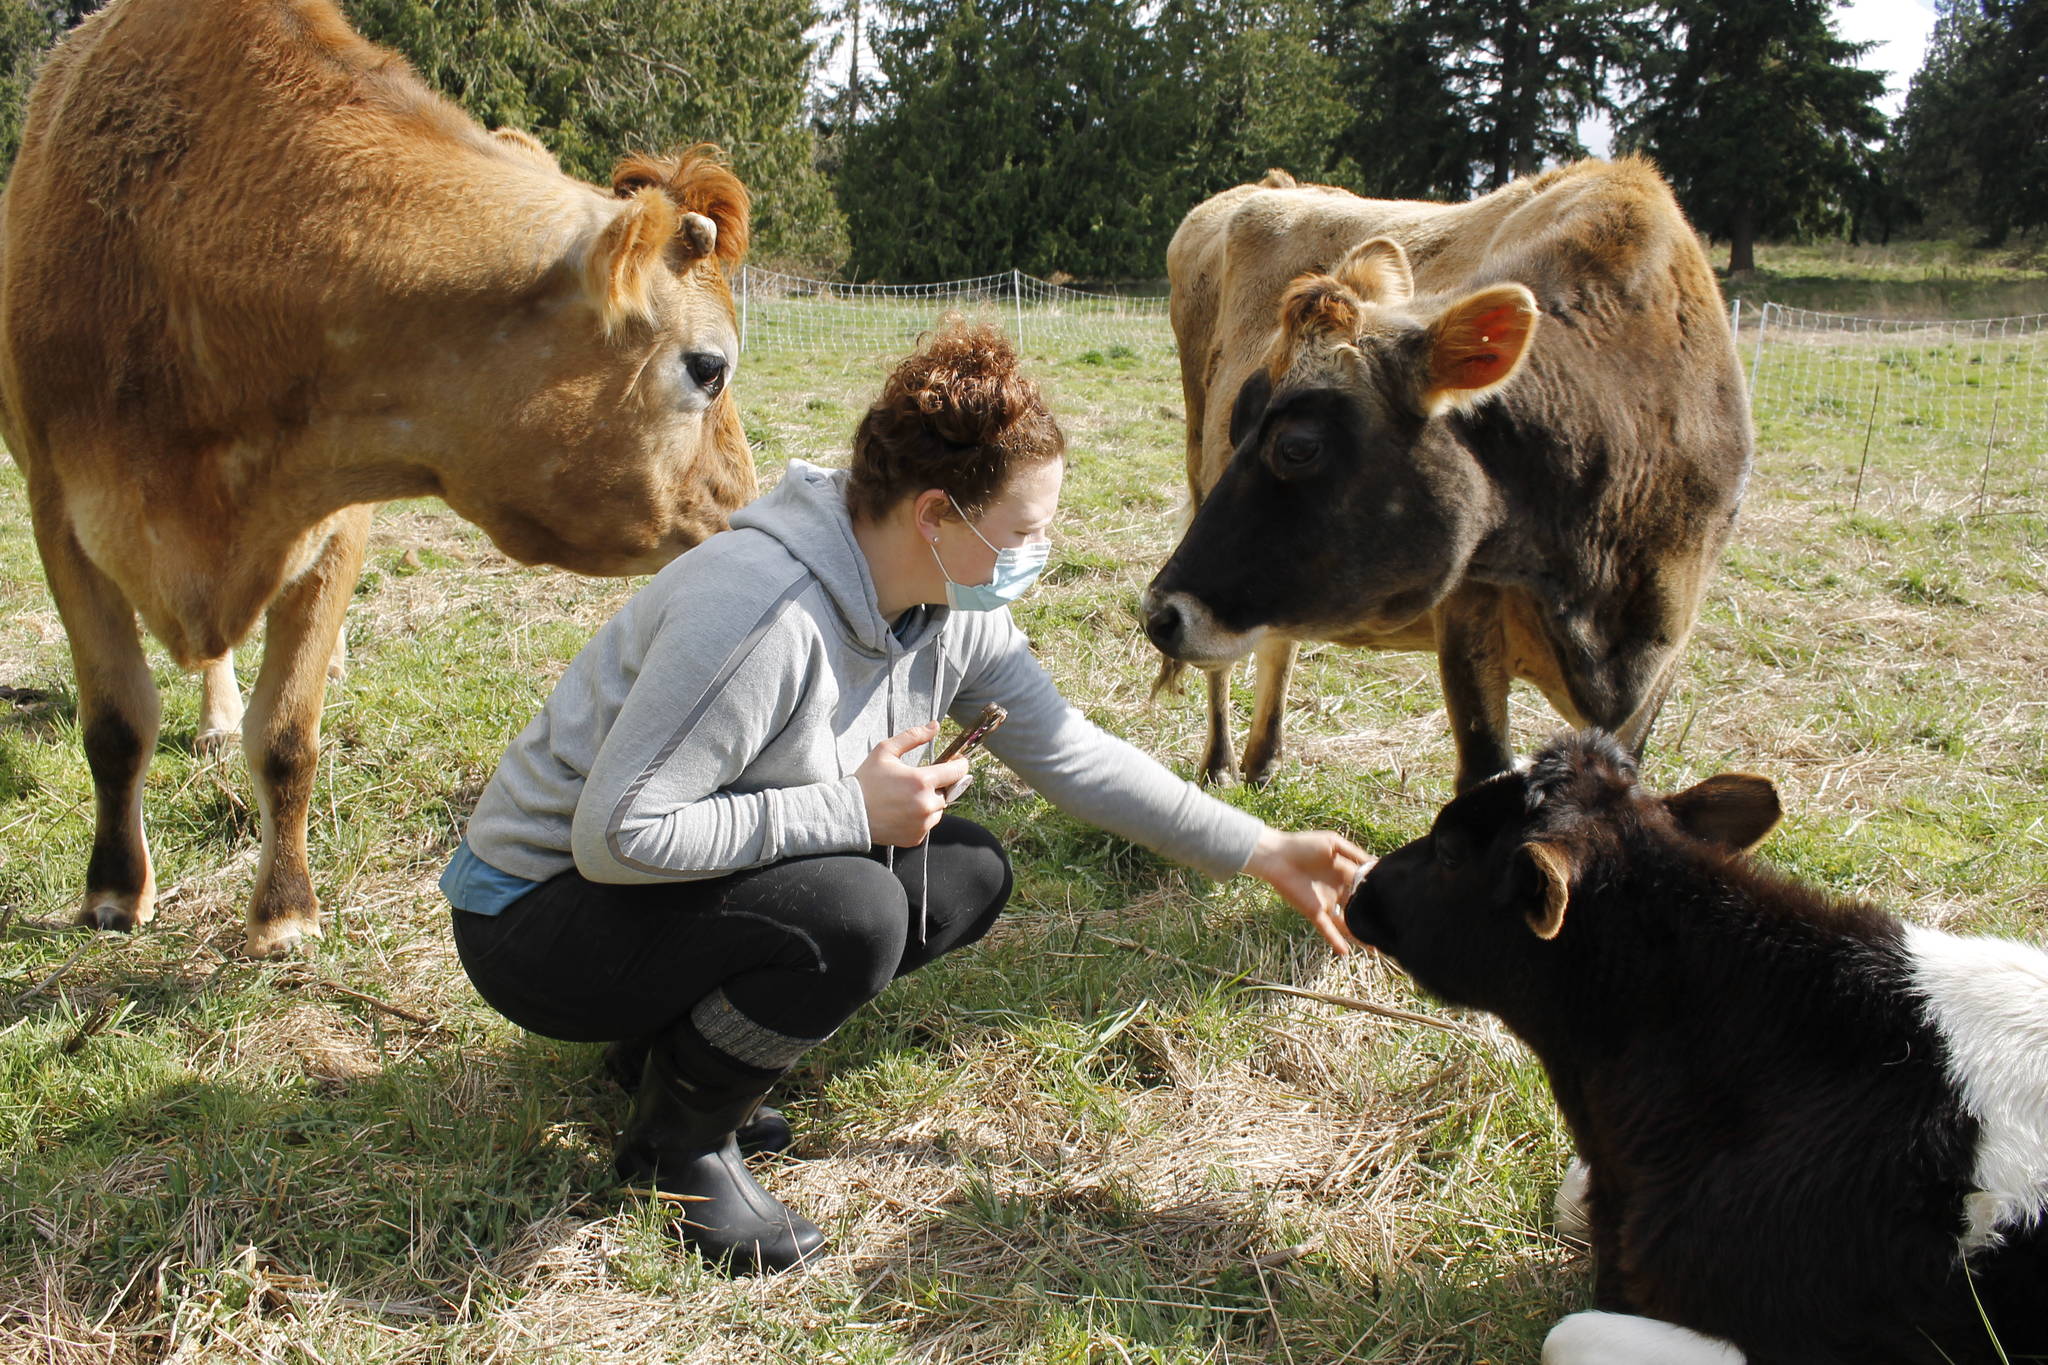 Sarah Santosa is surrounded by some bovine residents of Ballydídean Farm Sanctuary, including ‘Rez, Dahlia and Poco. Photo by Kira Erickson/South Whidbey Record